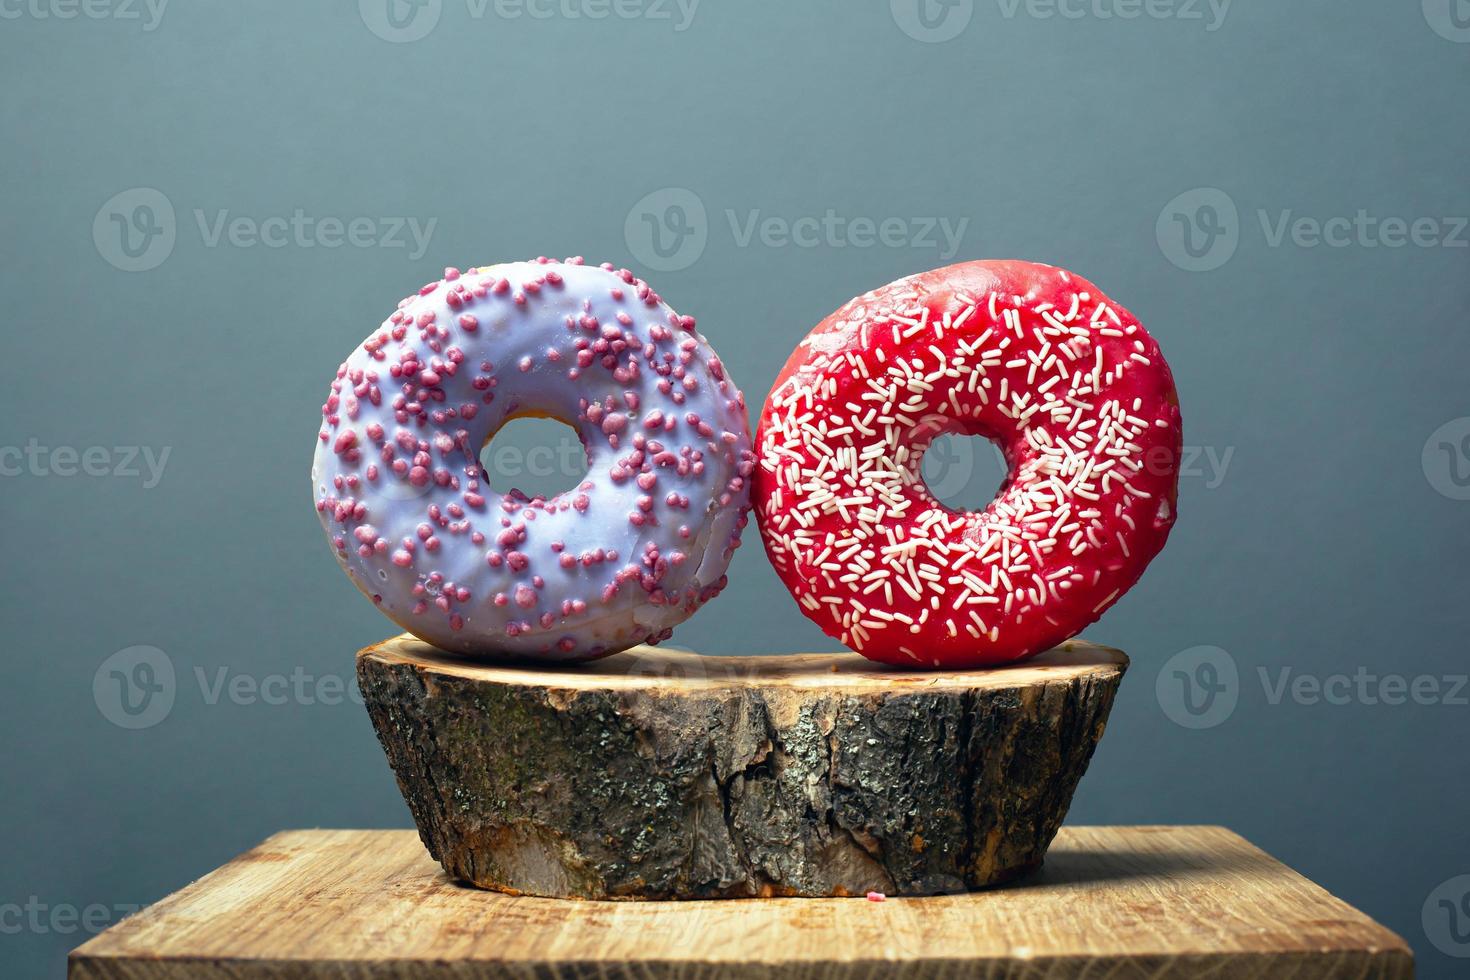 Two round glazed donuts sprinkled with sweet icing red and purple on a wooden base on gray background photo